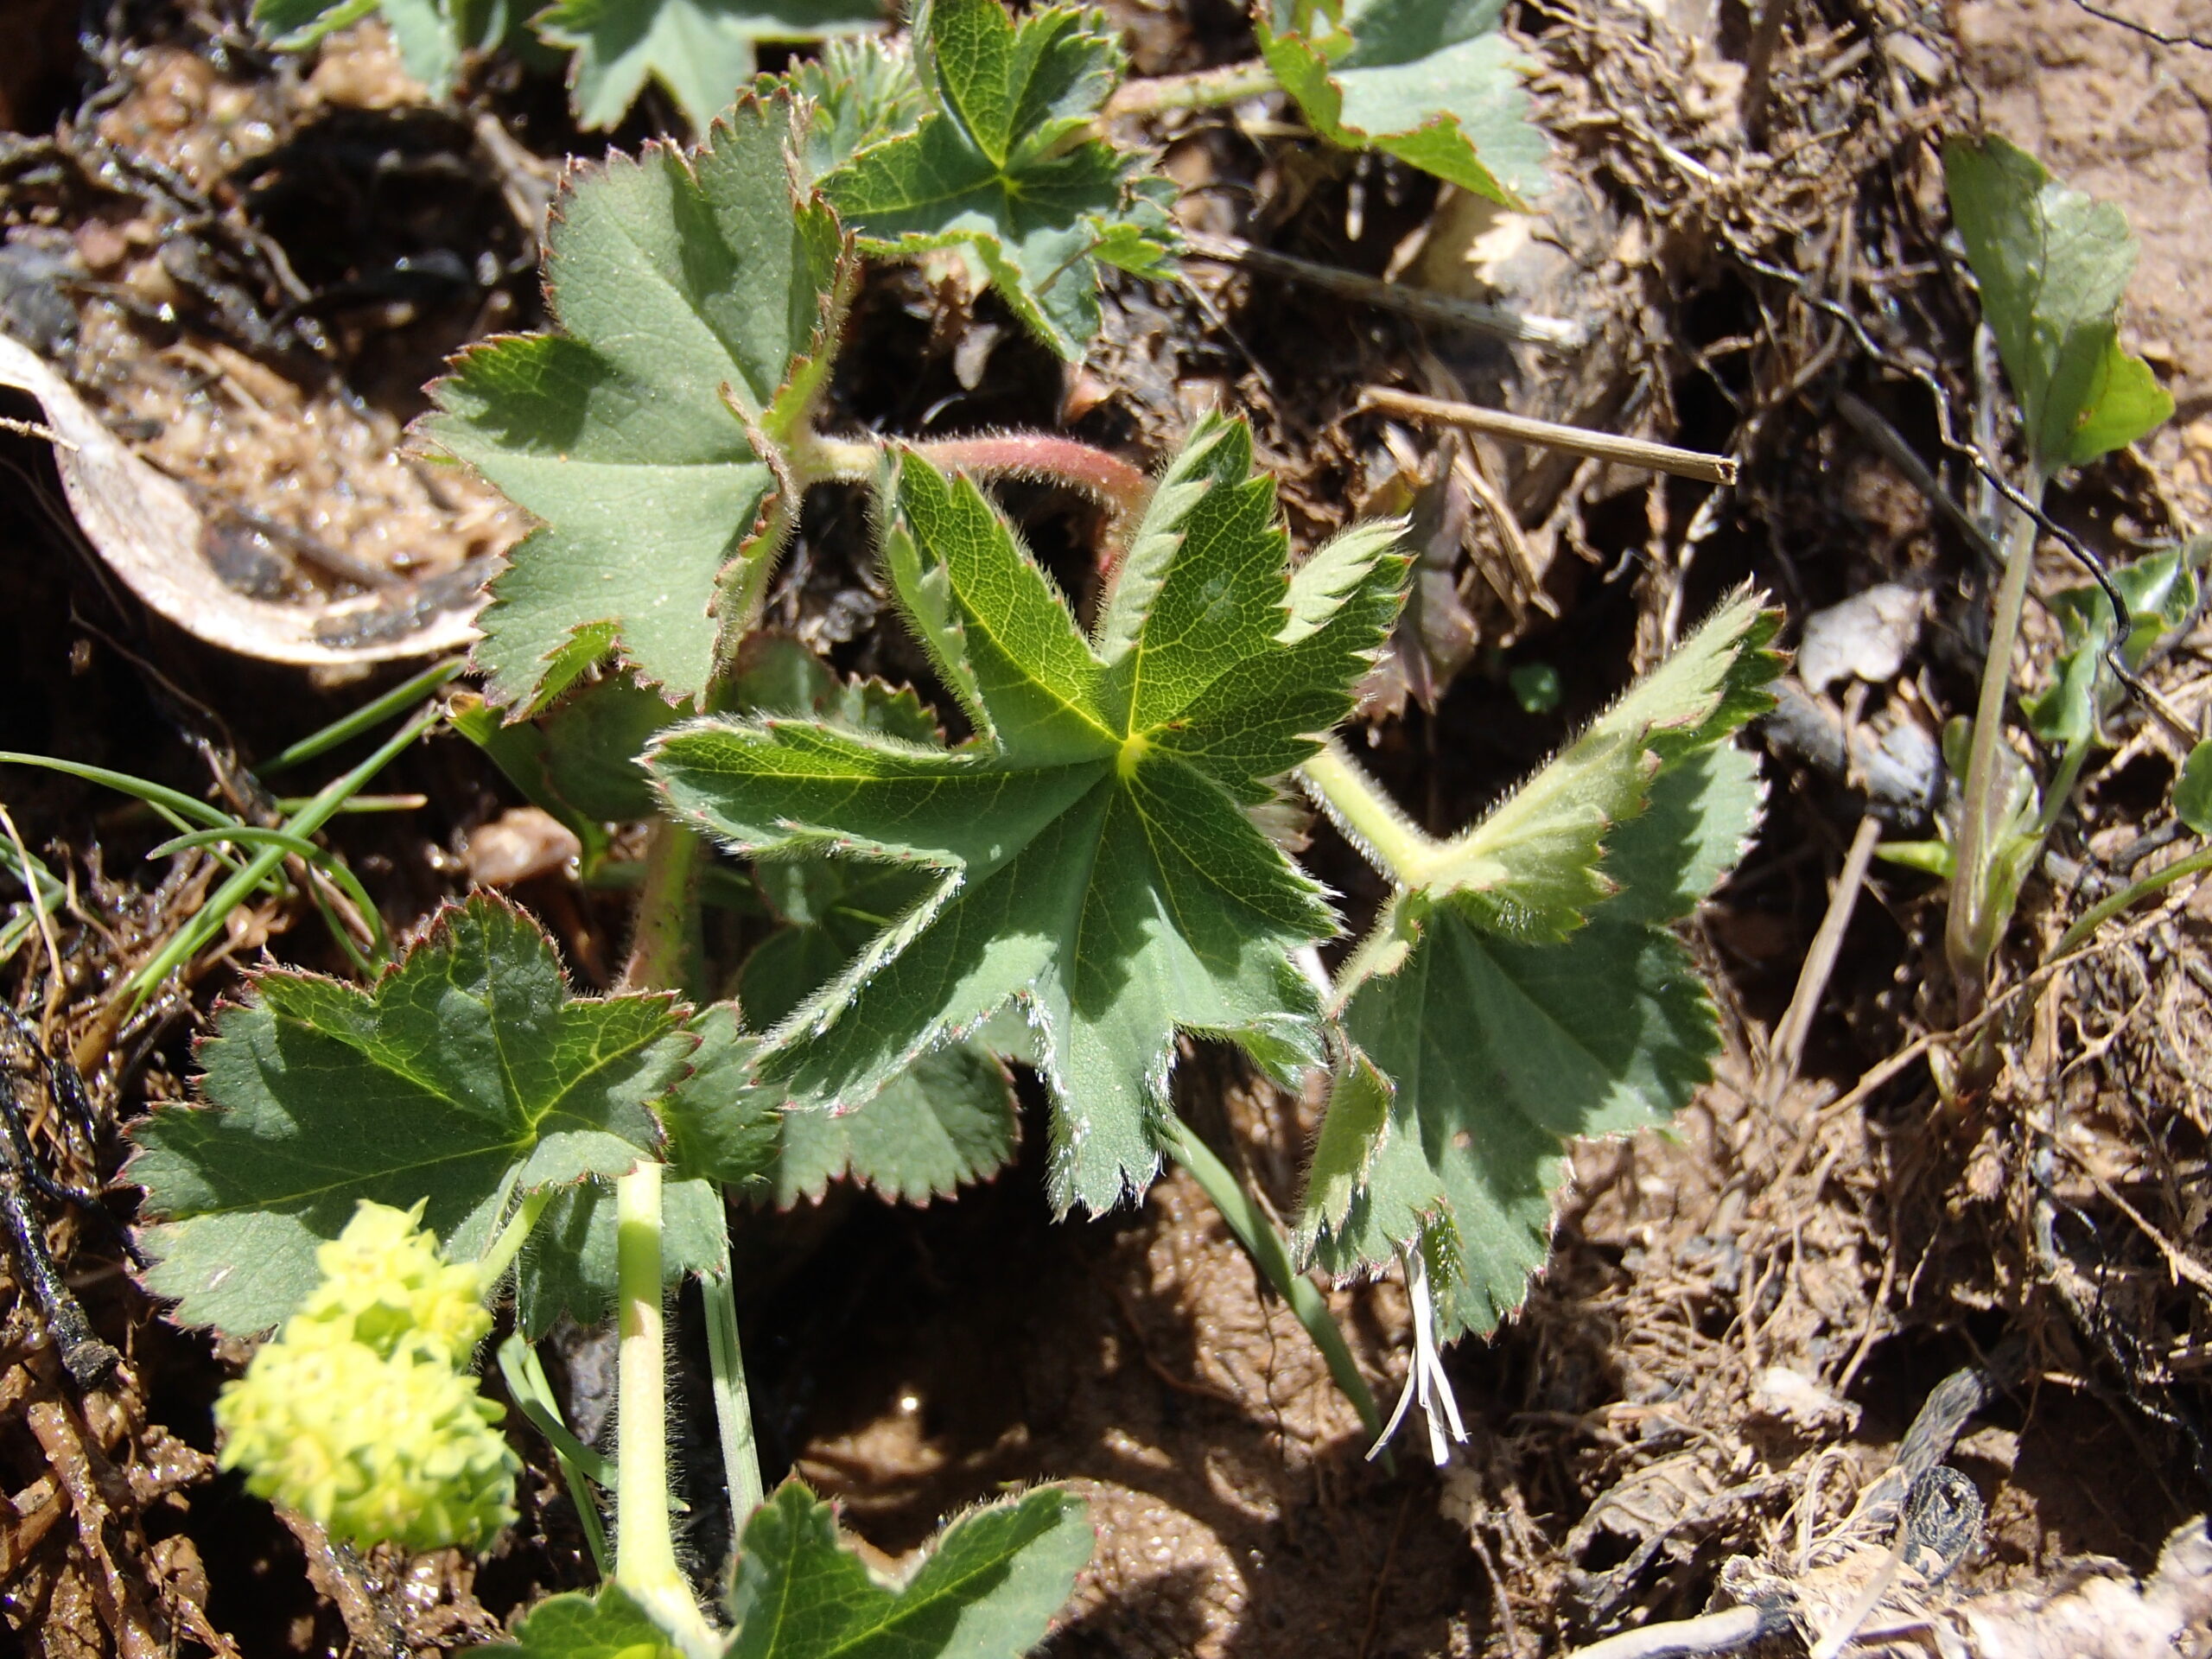 A photograph of the Diadem lady’s mantle plant, green spiky leaves in a star shape.